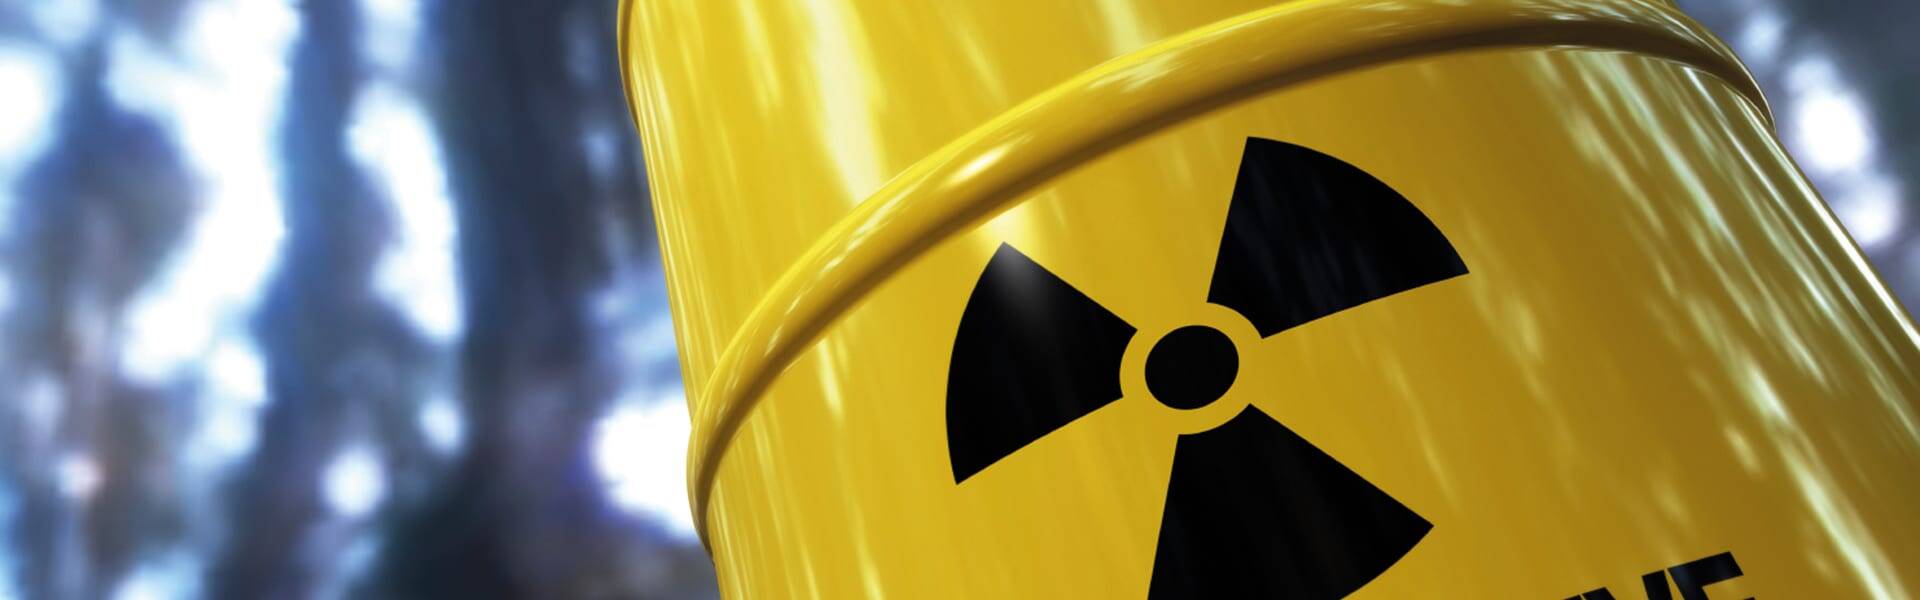 Who will fill the nuclear gap?